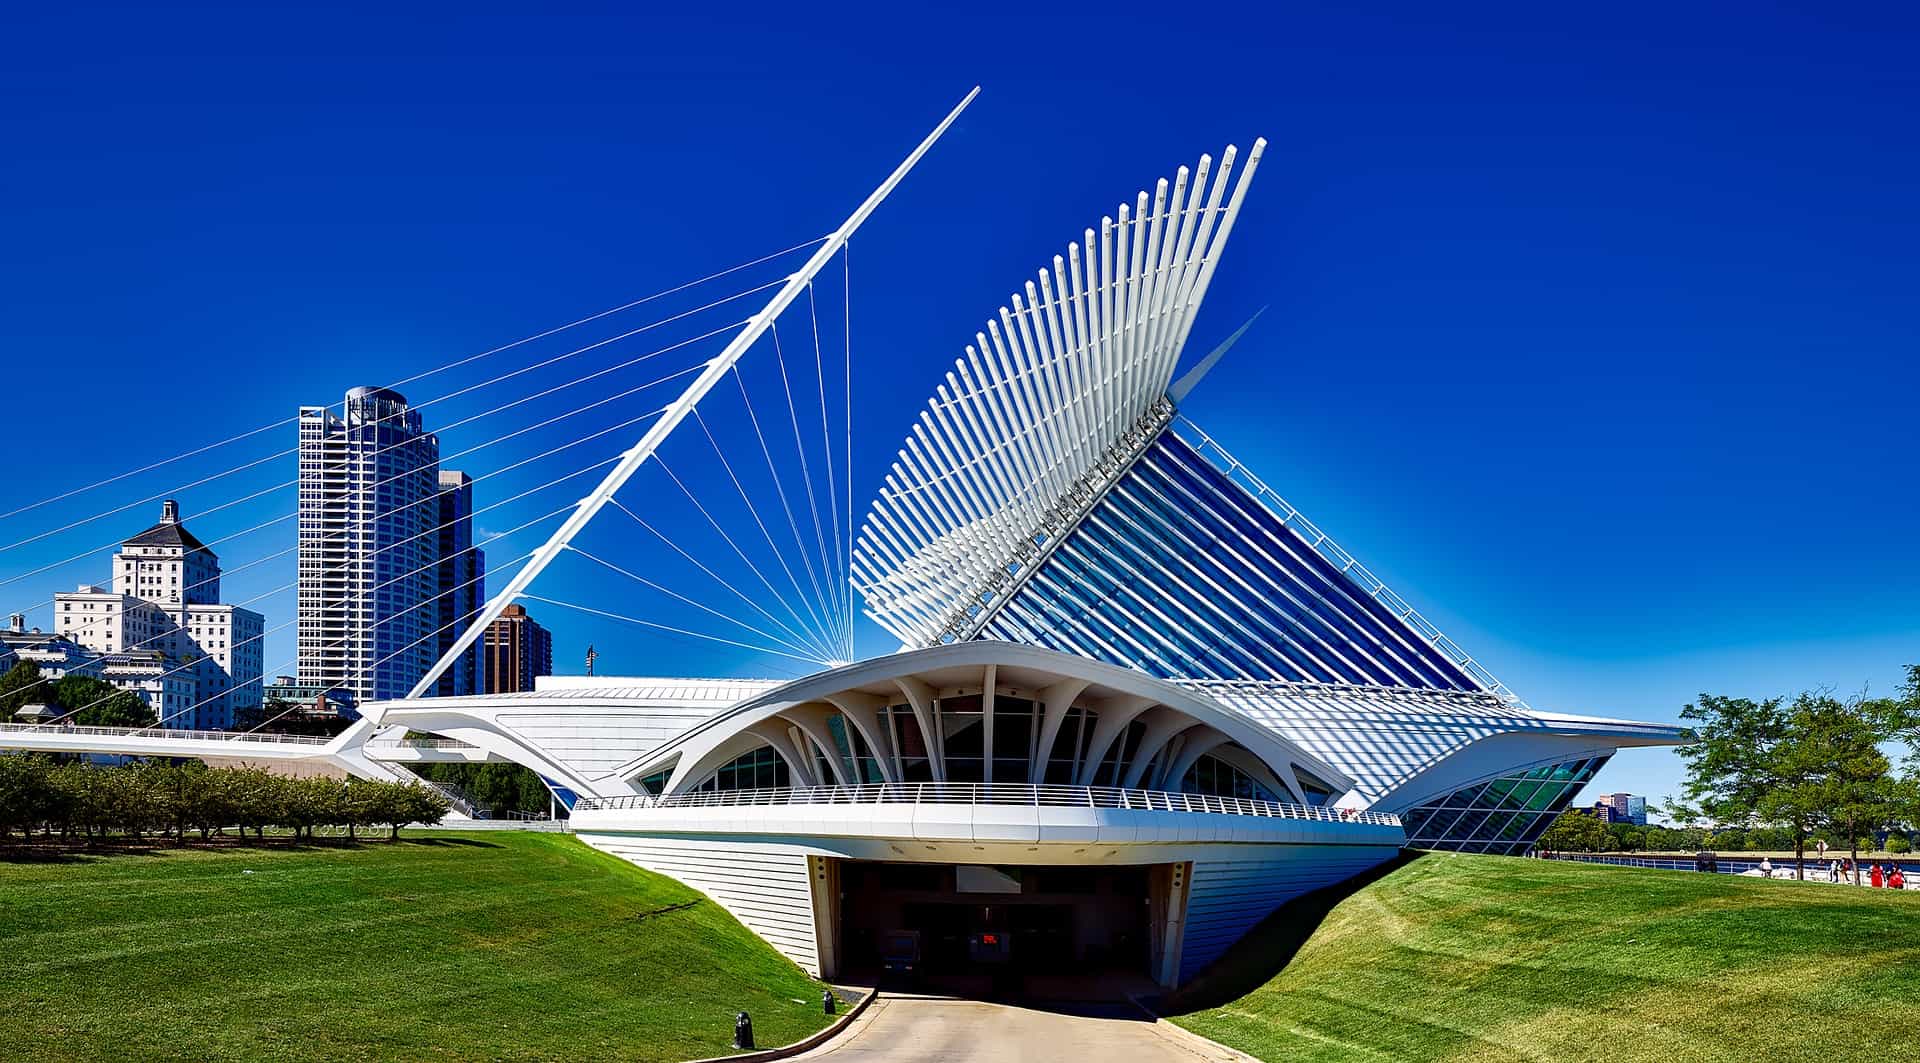 Outside of the Milwaukee Art Museum